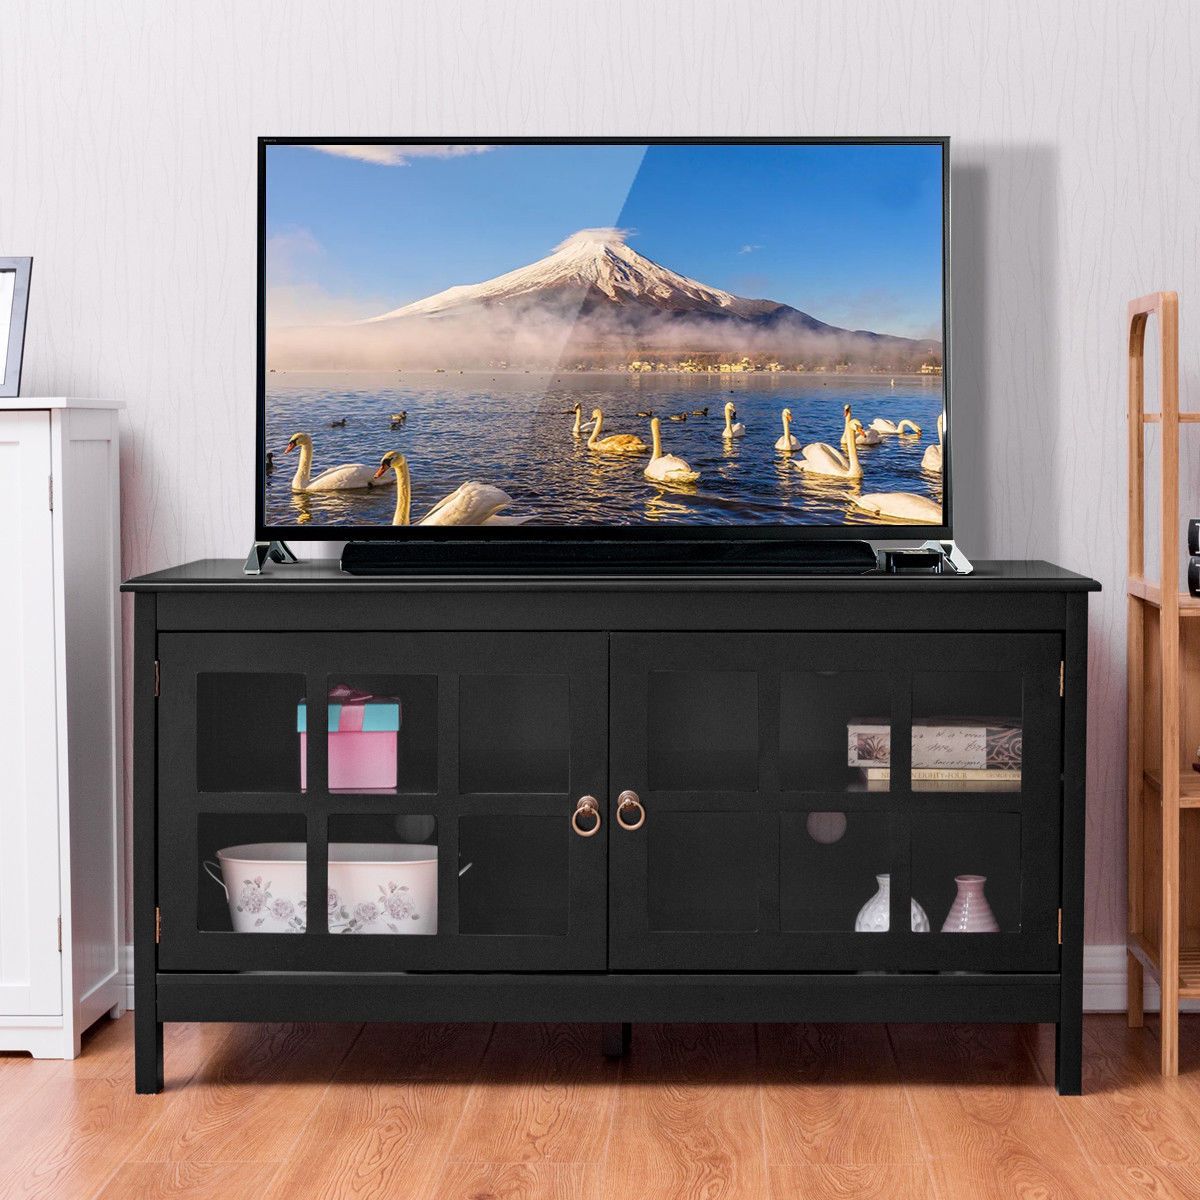 Gymax 50'' Tv Stand Modern Wood Storage Console Regarding Wooden Tv Stands For 50 Inch Tv (View 13 of 15)